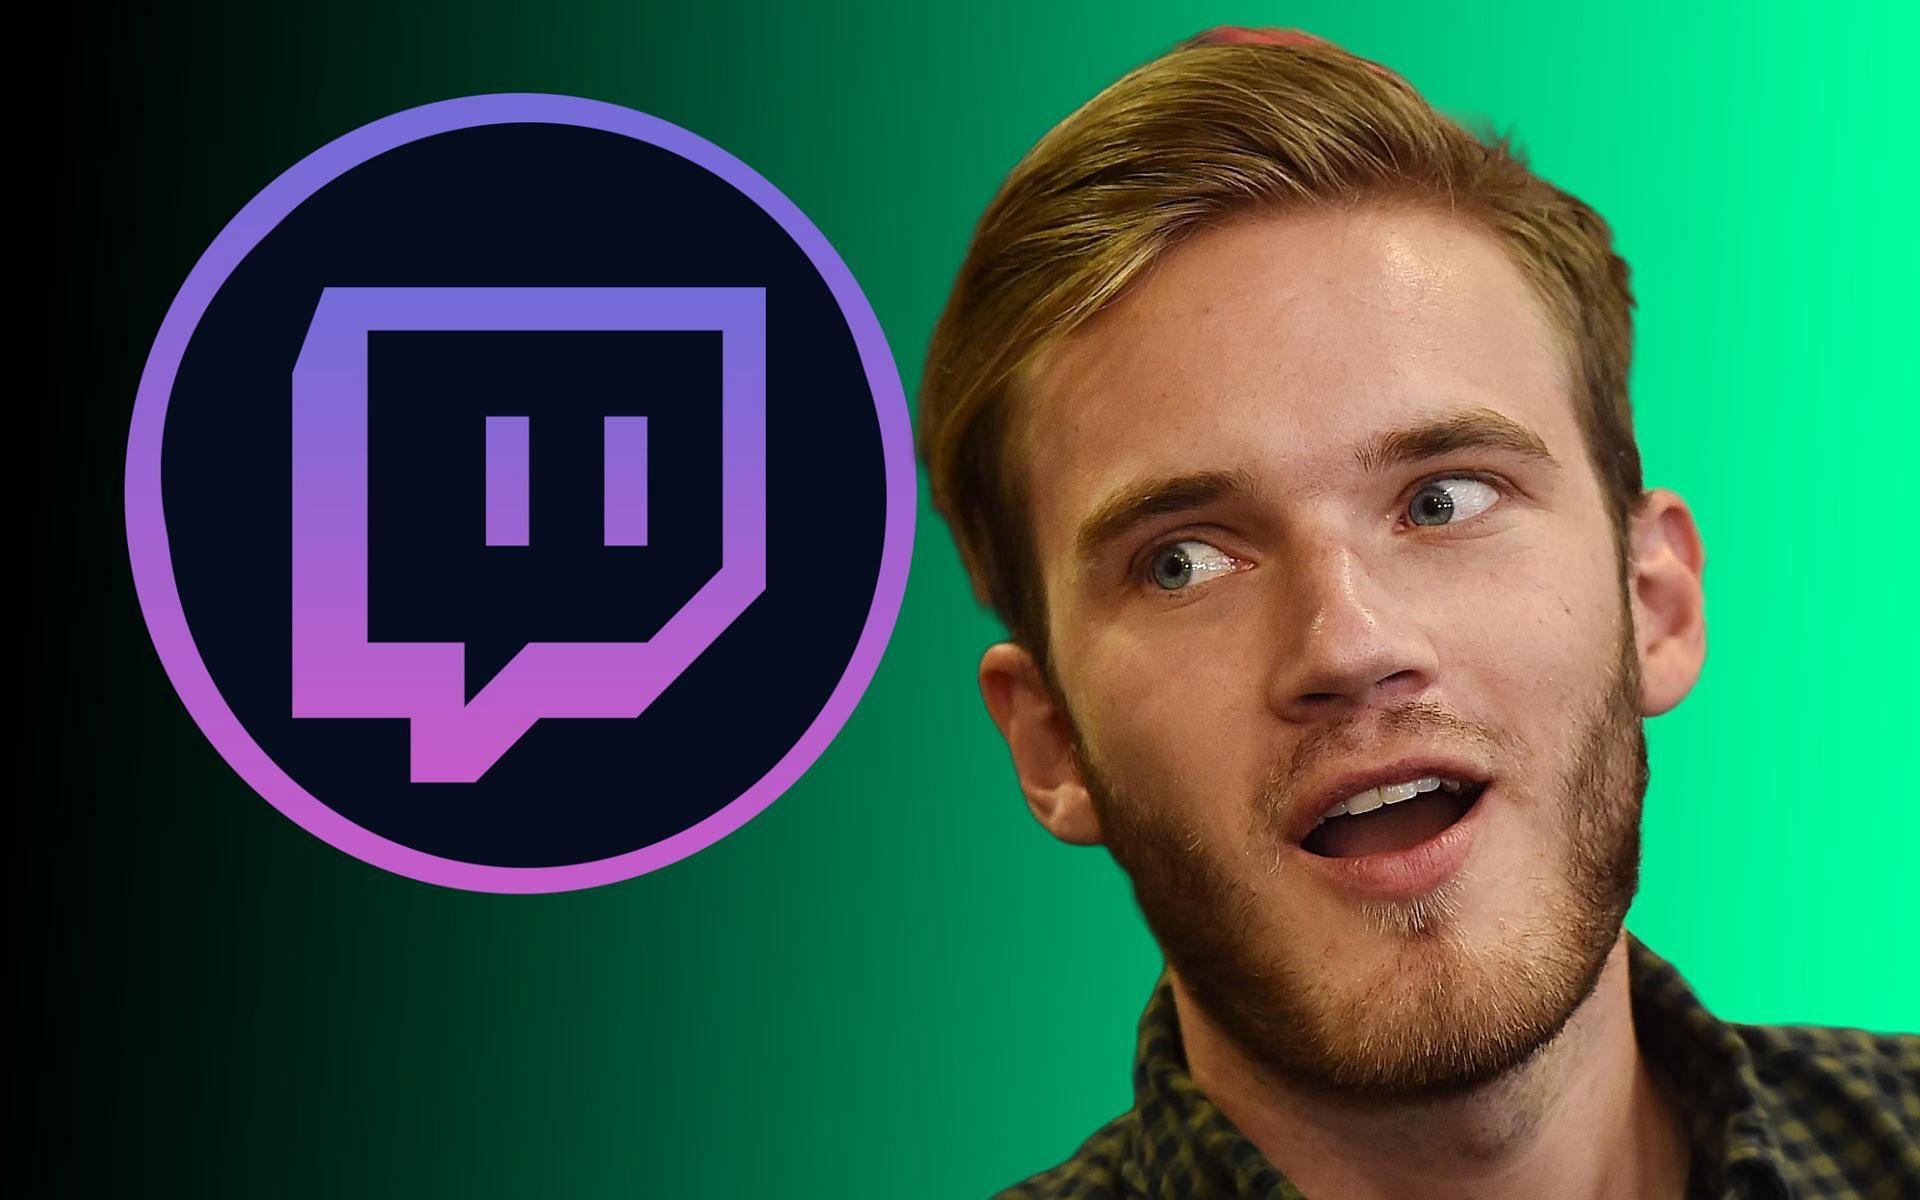 PewDiePie banned from Roblox after surprise livestream amid  battle  with T-Series - Dexerto